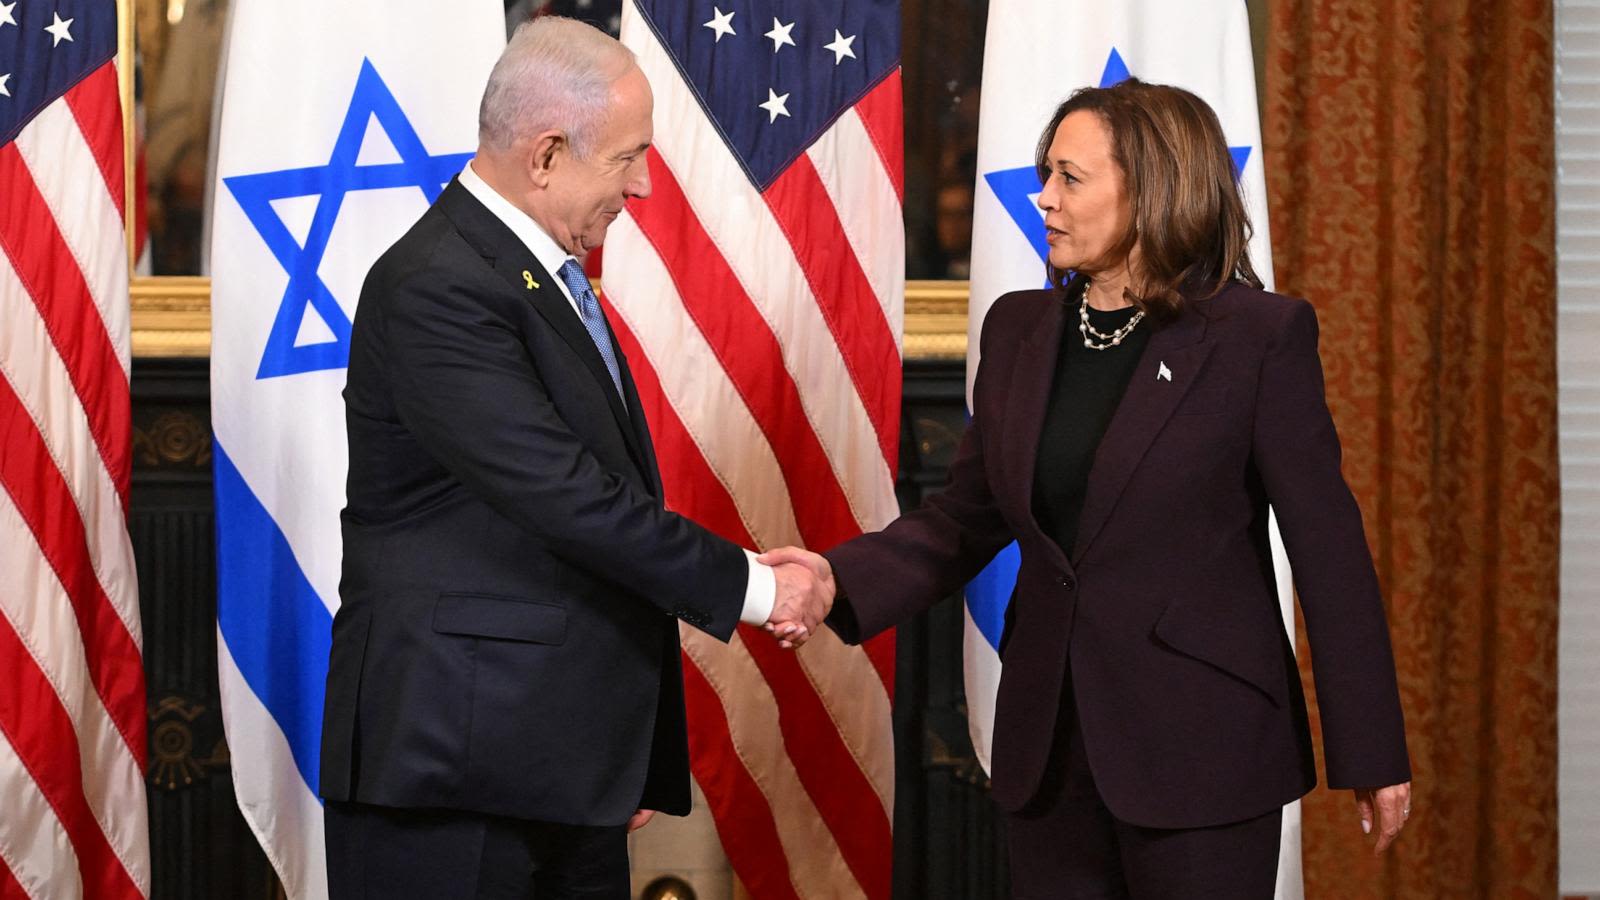 Harris pushes cease-fire after Netanyahu meets with her, Biden separately